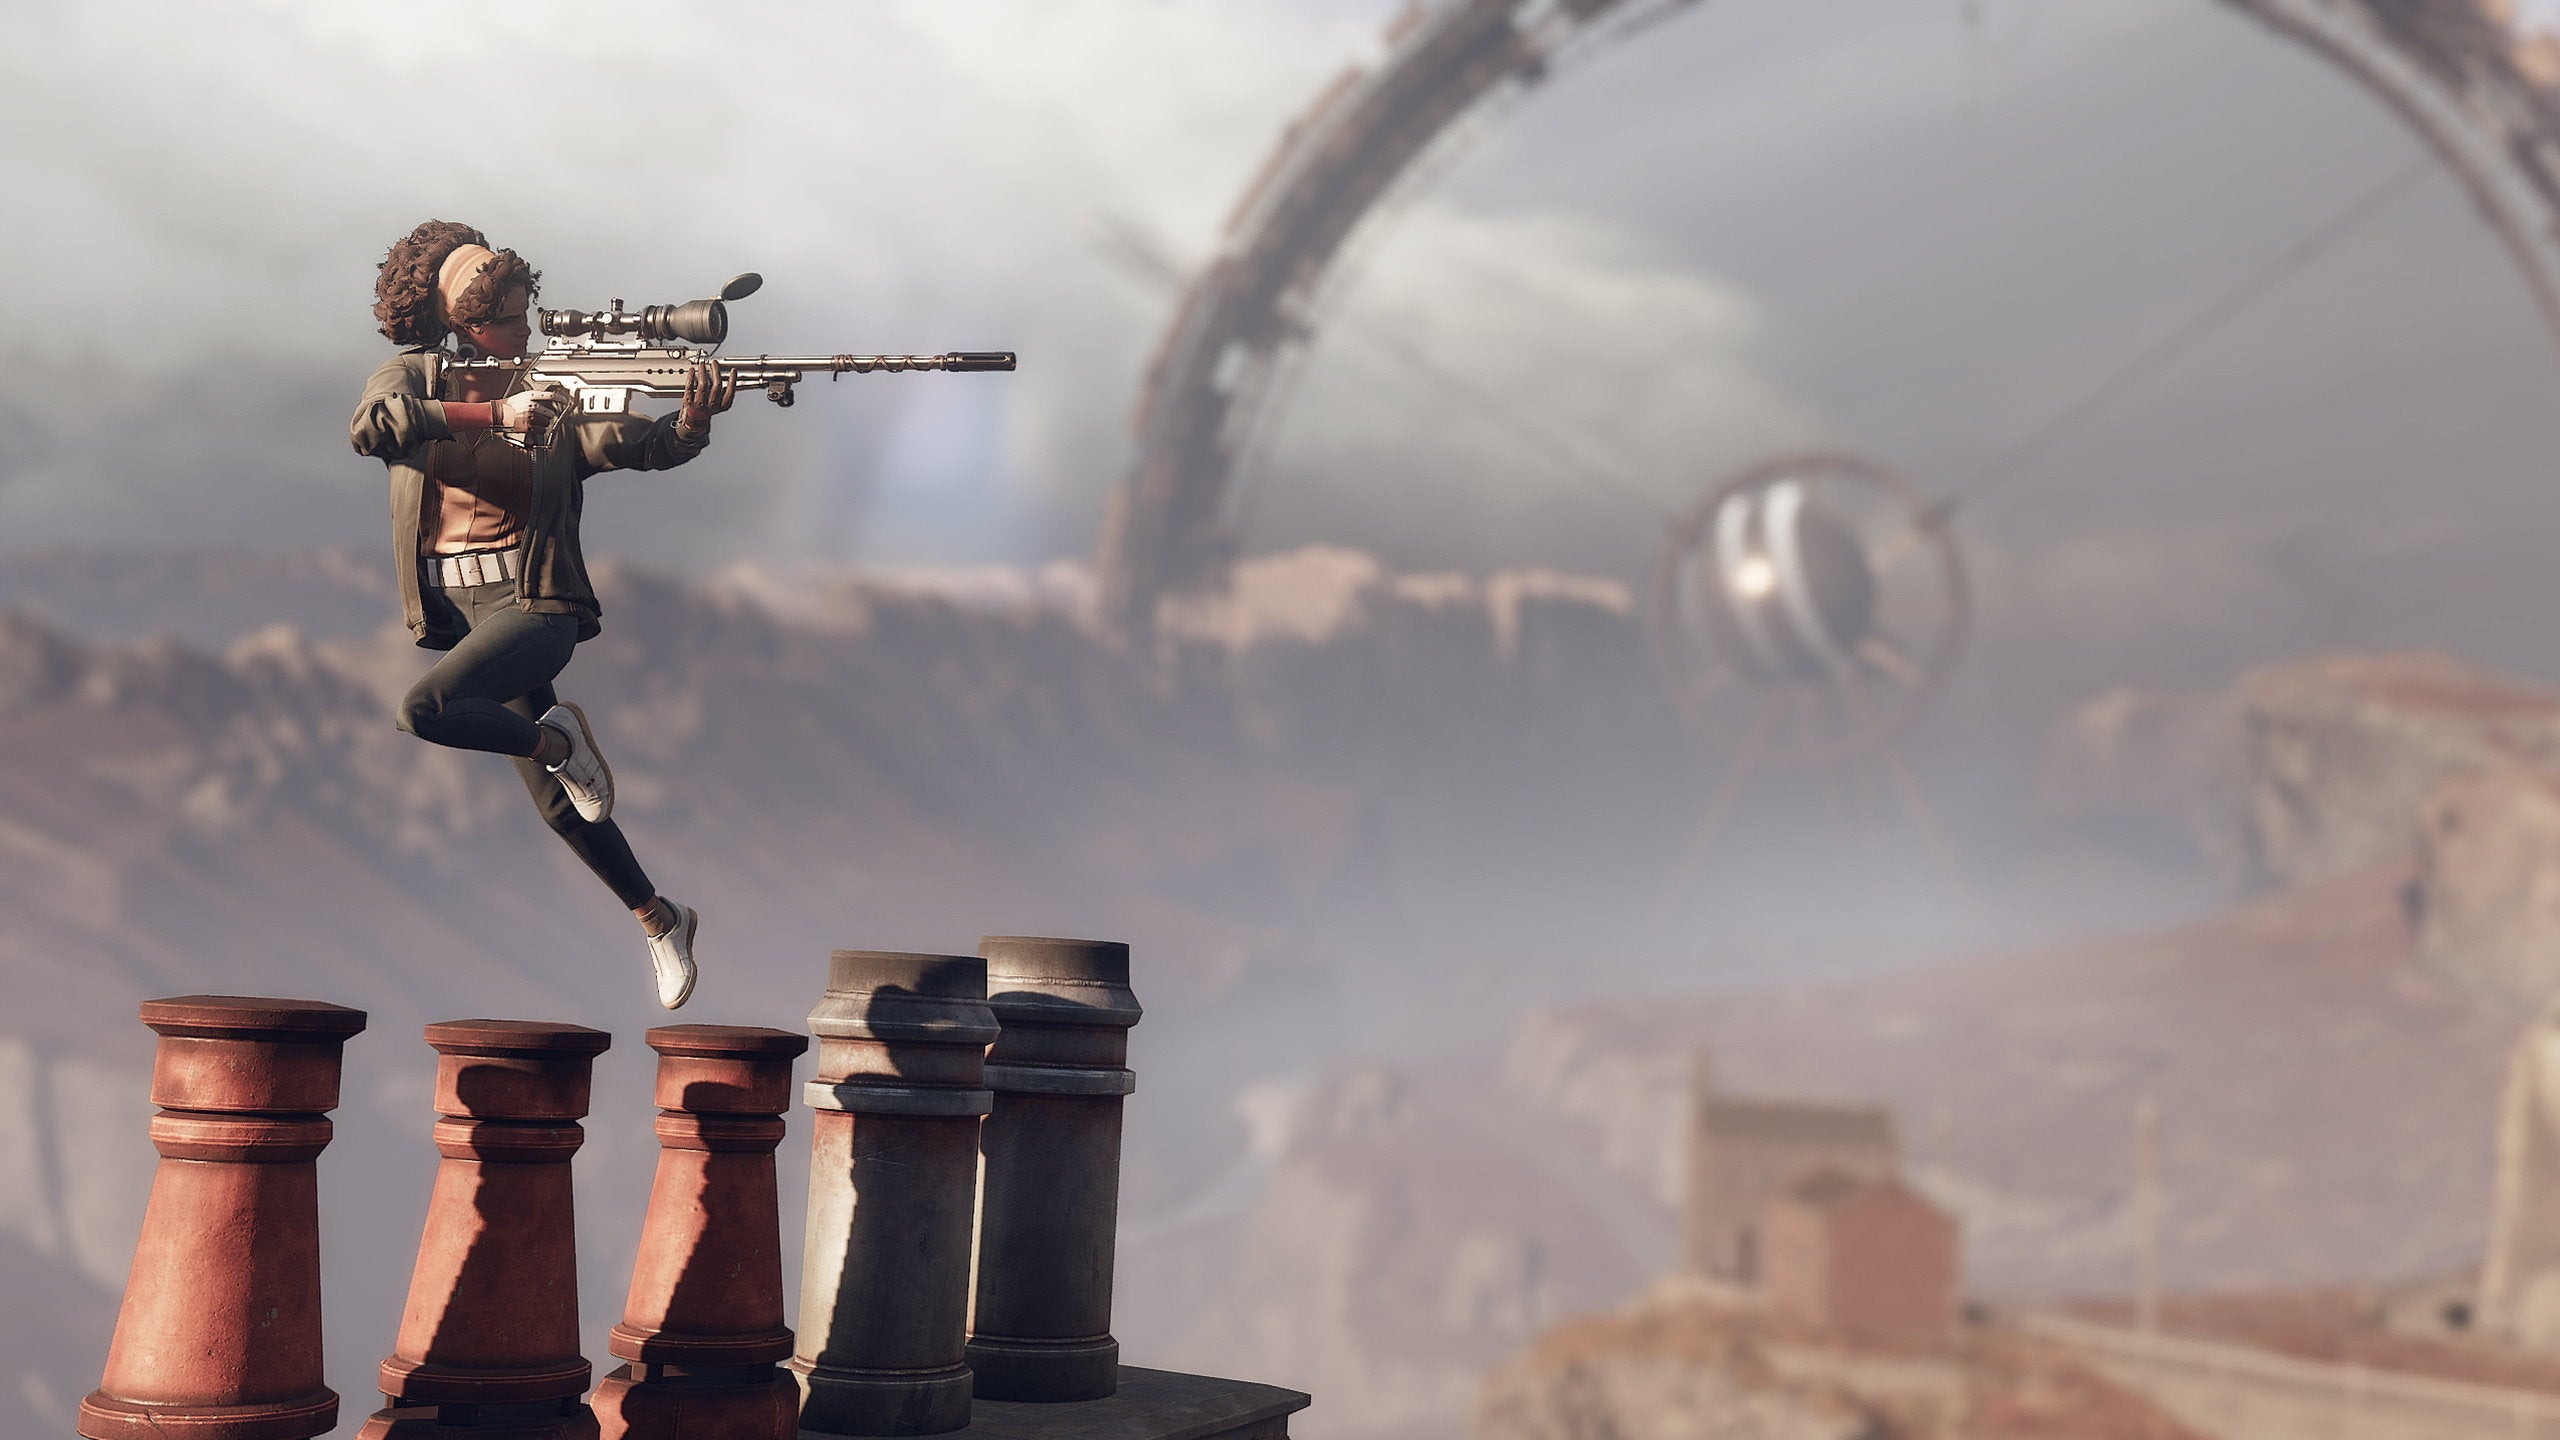 Julianna leaps across a rooftop while holding a sniper rifle in Deathloop